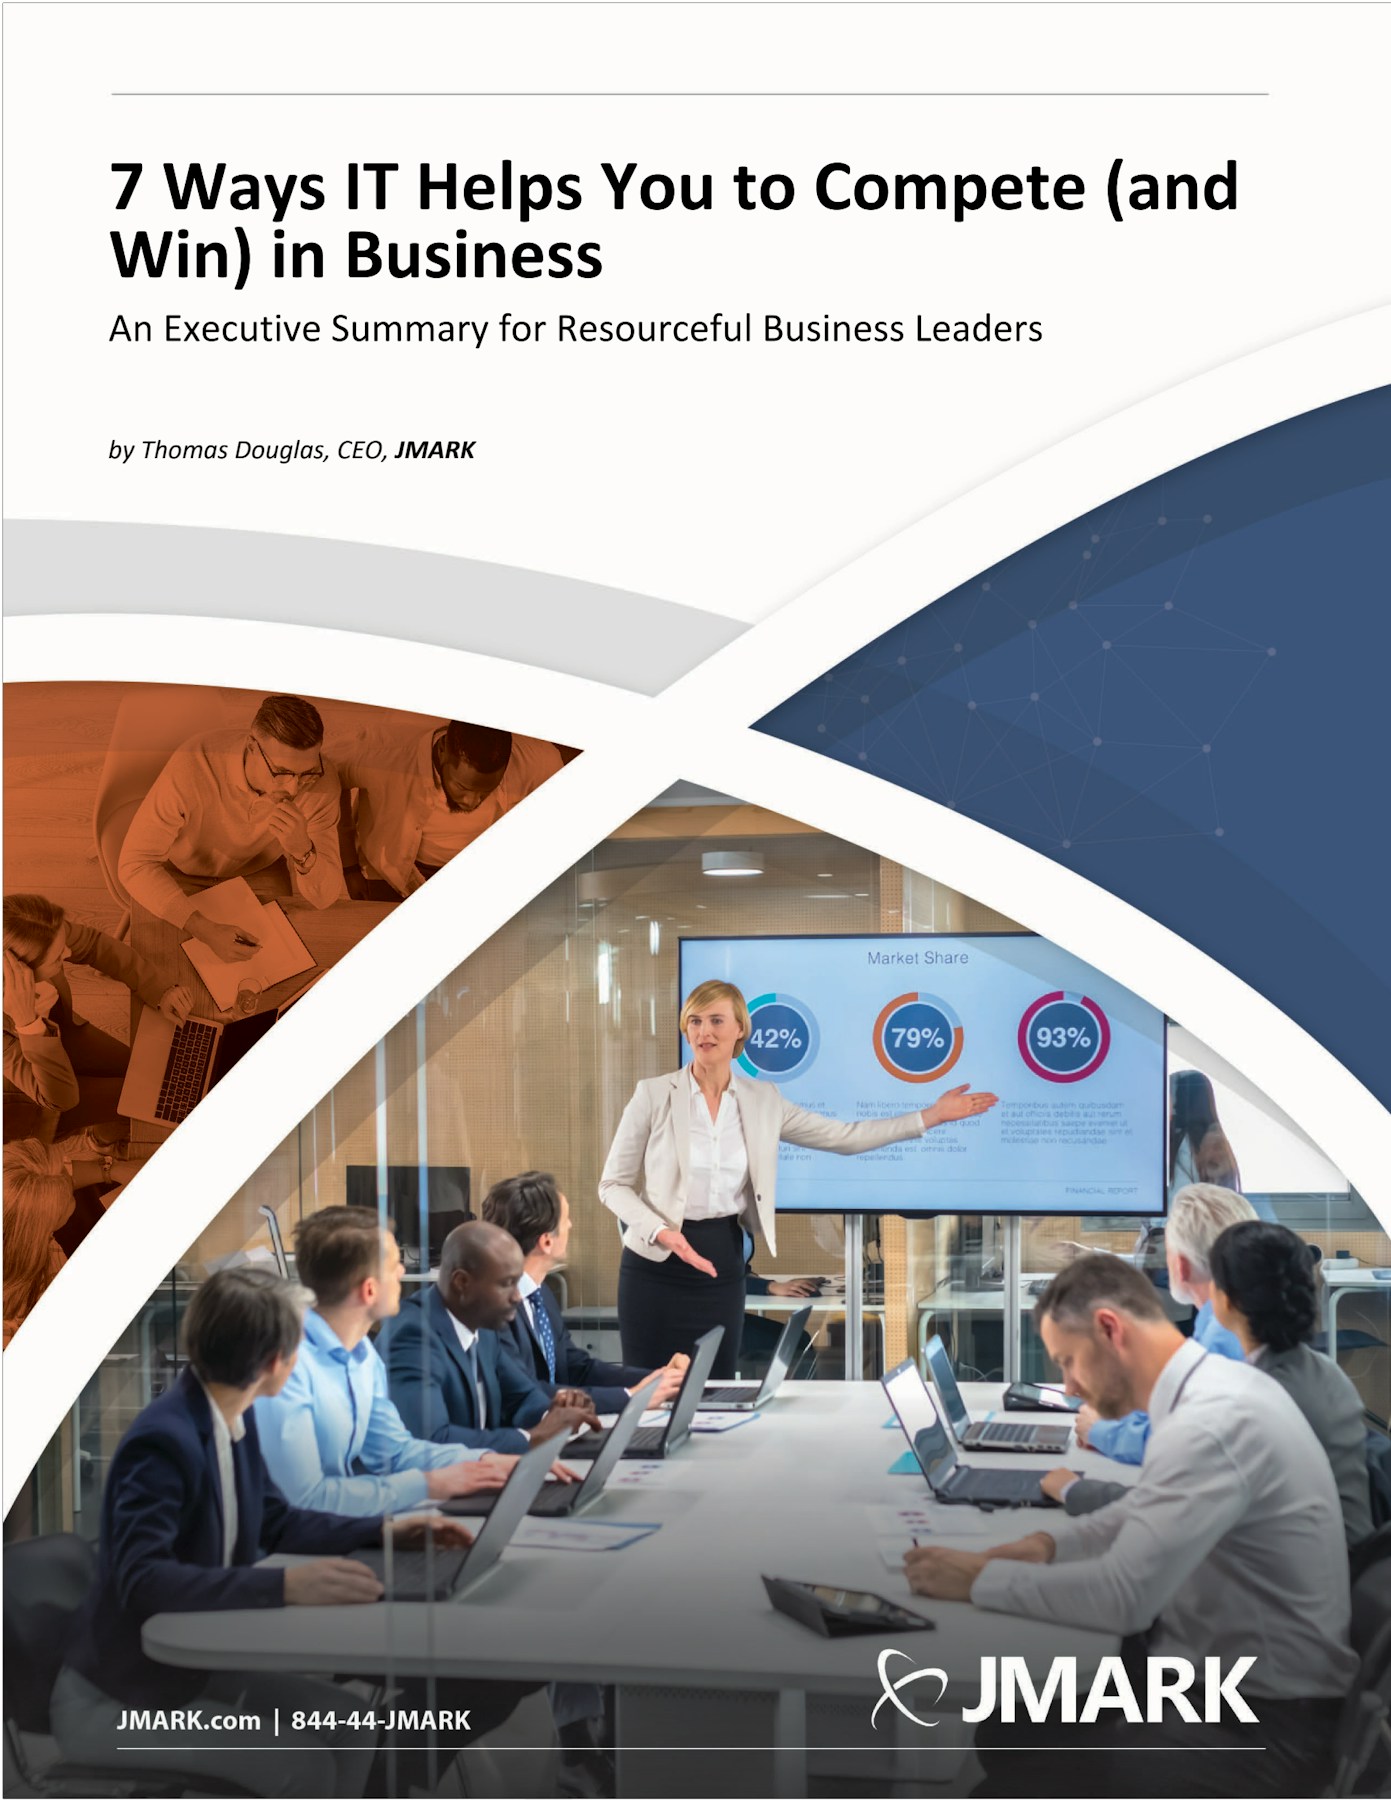 Preview: 7 Ways IT Helps You Compete in Business